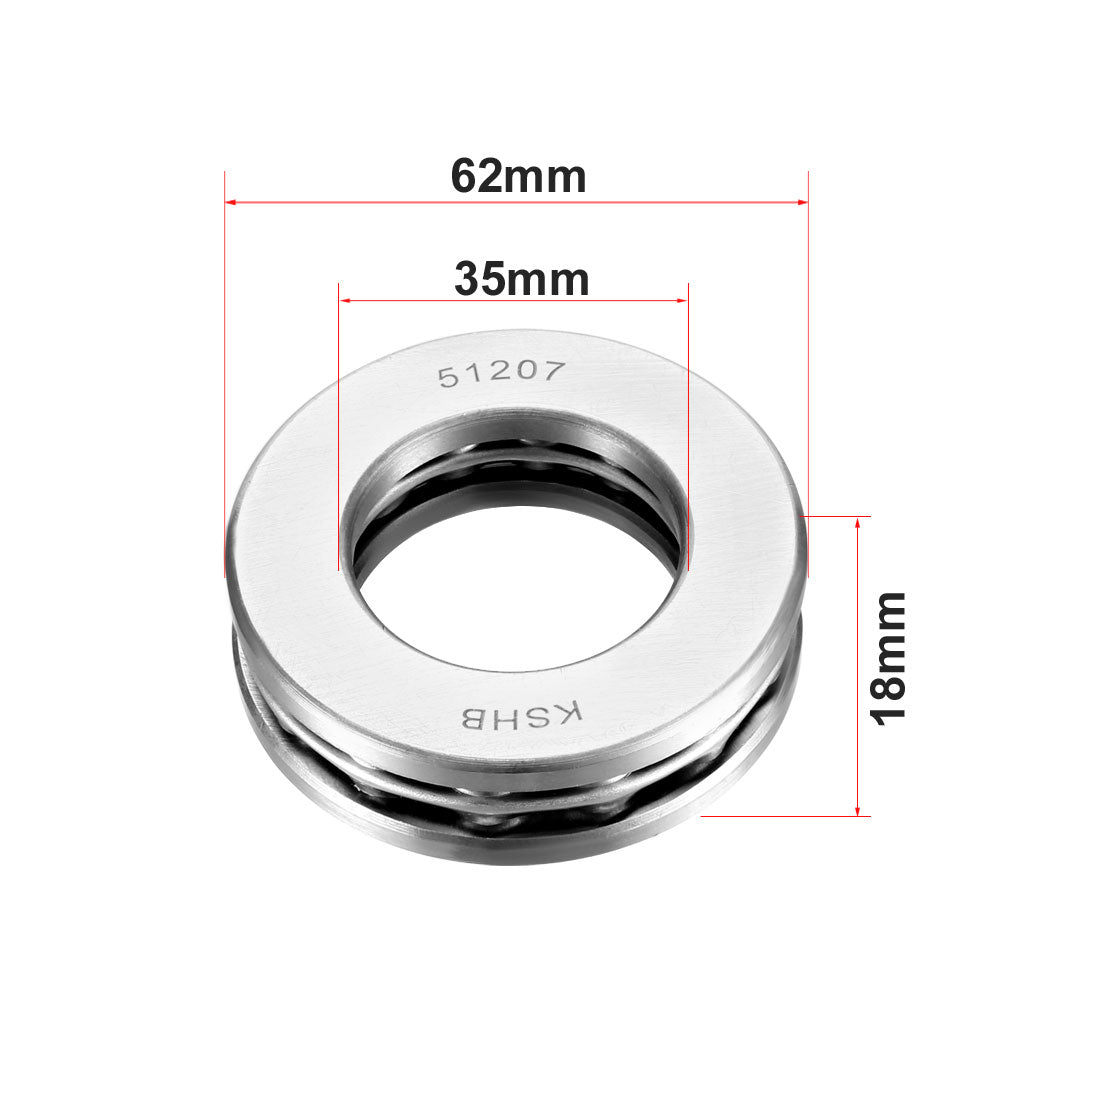 uxcell Uxcell 51207 Single Direction Thrust Ball Bearings 35mm x 62mm x 18mm Chrome Steel